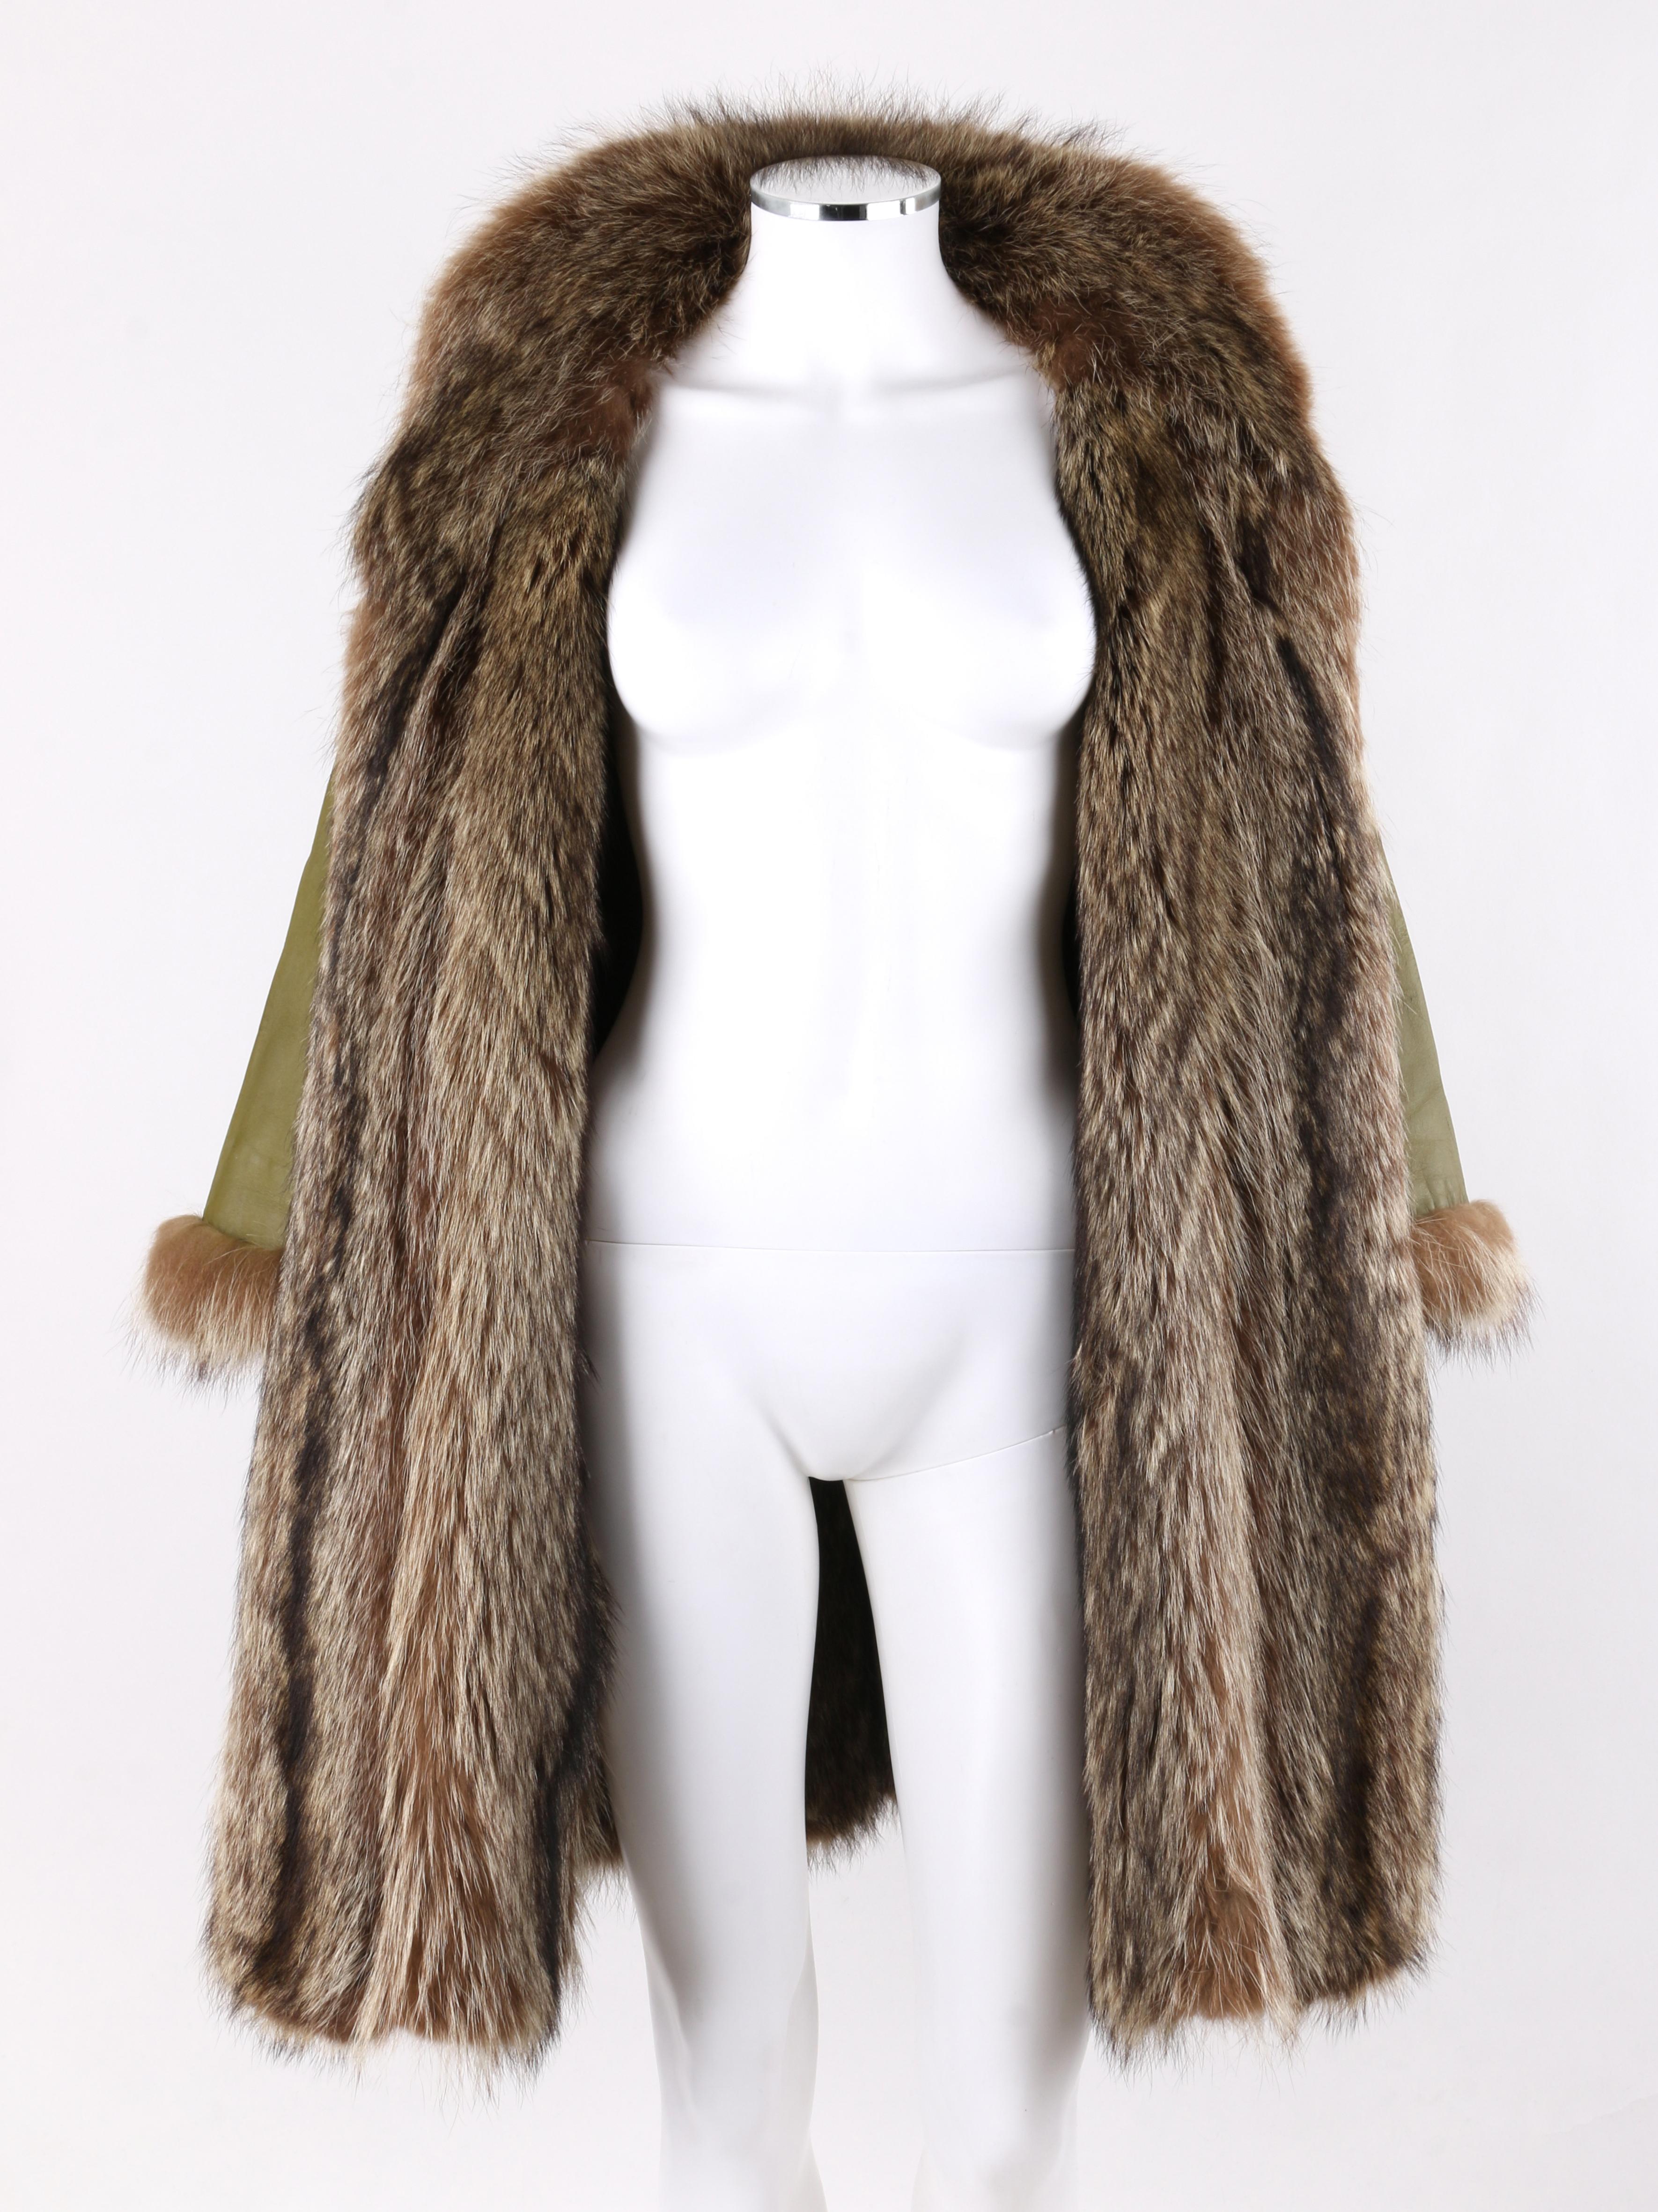 BONNIE CASHIN c.1960’s SILLS & Co. Olive Green Raccoon Fur Leather Mod Overcoat In Good Condition For Sale In Thiensville, WI